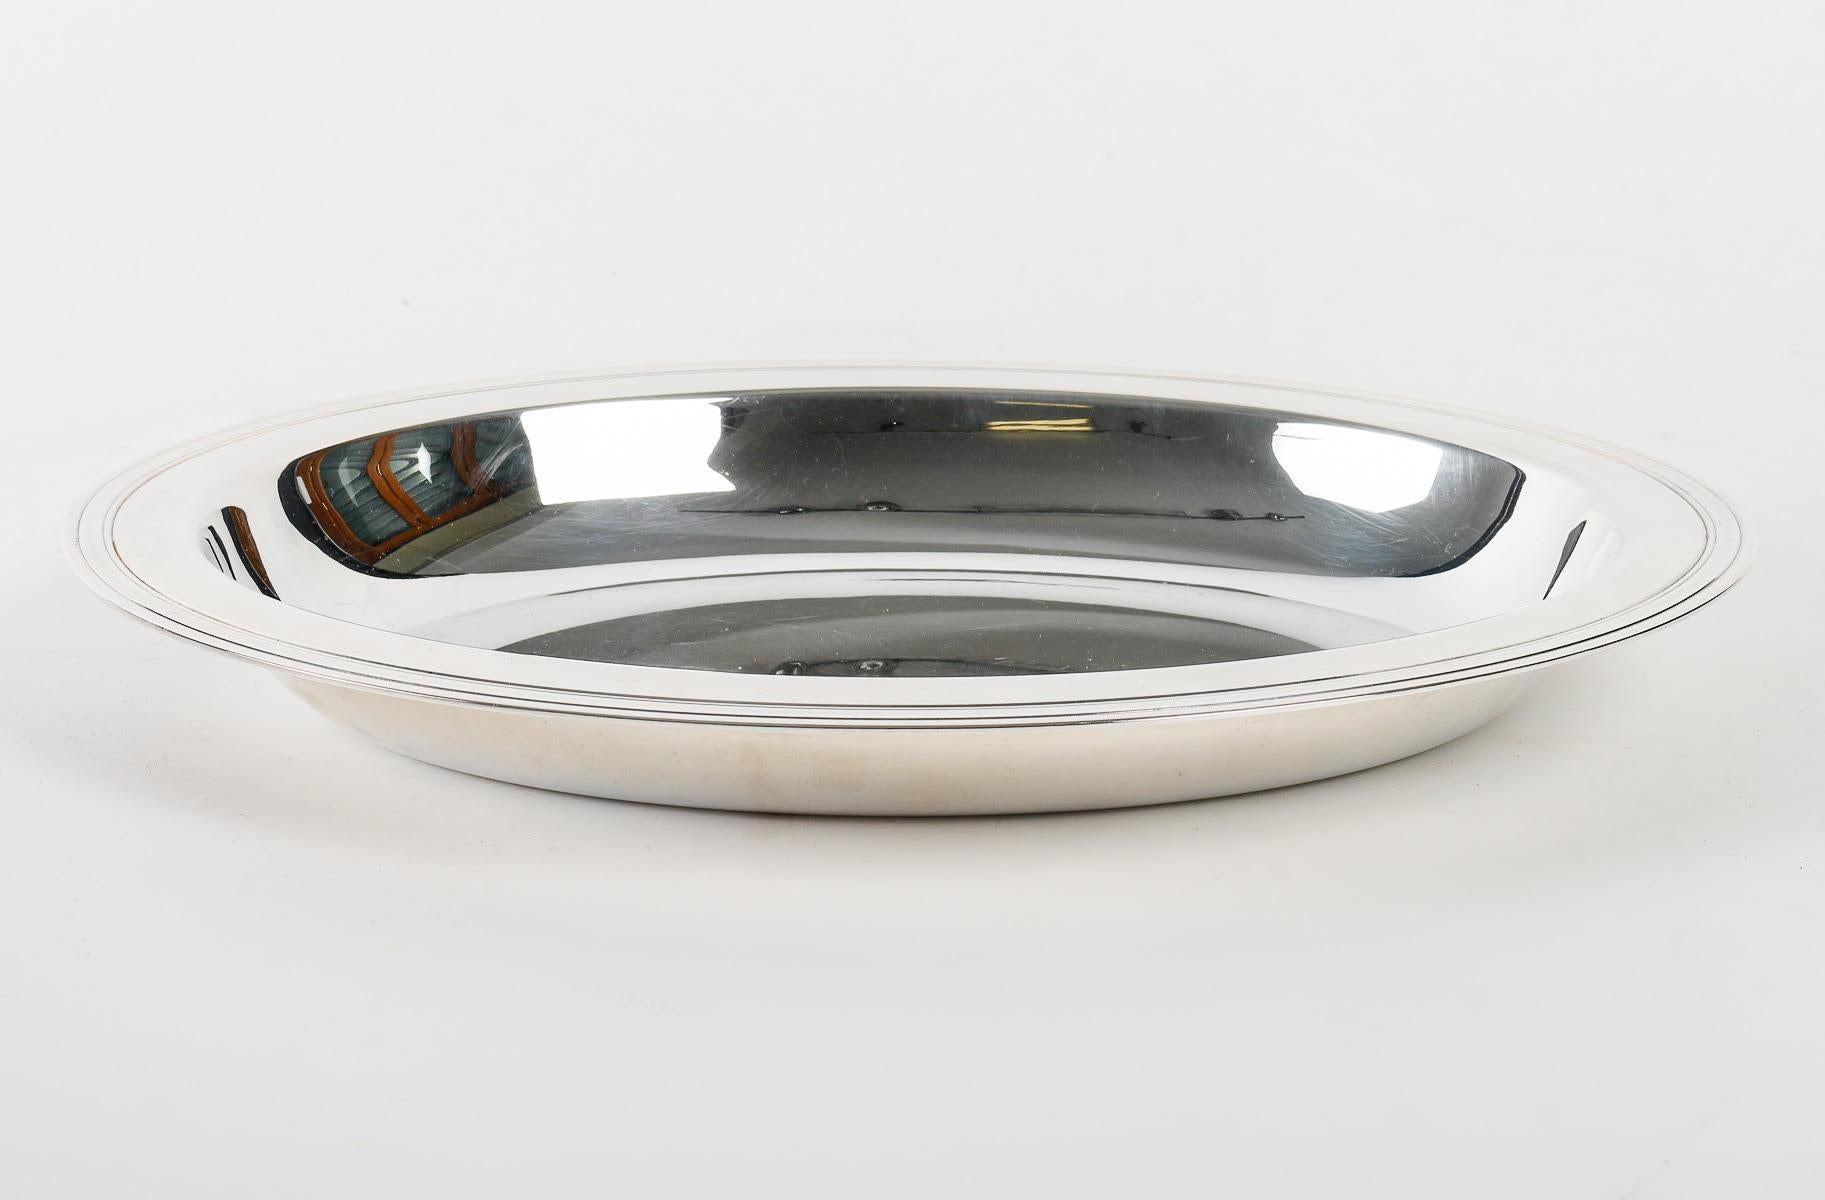 Silver plated dish by Christofle, 1980.

Silver plated dish by Christofle in its original box, very good condition, 1980.  
Box: h: 3.5cm, w: 31cm, d: 23.5cm